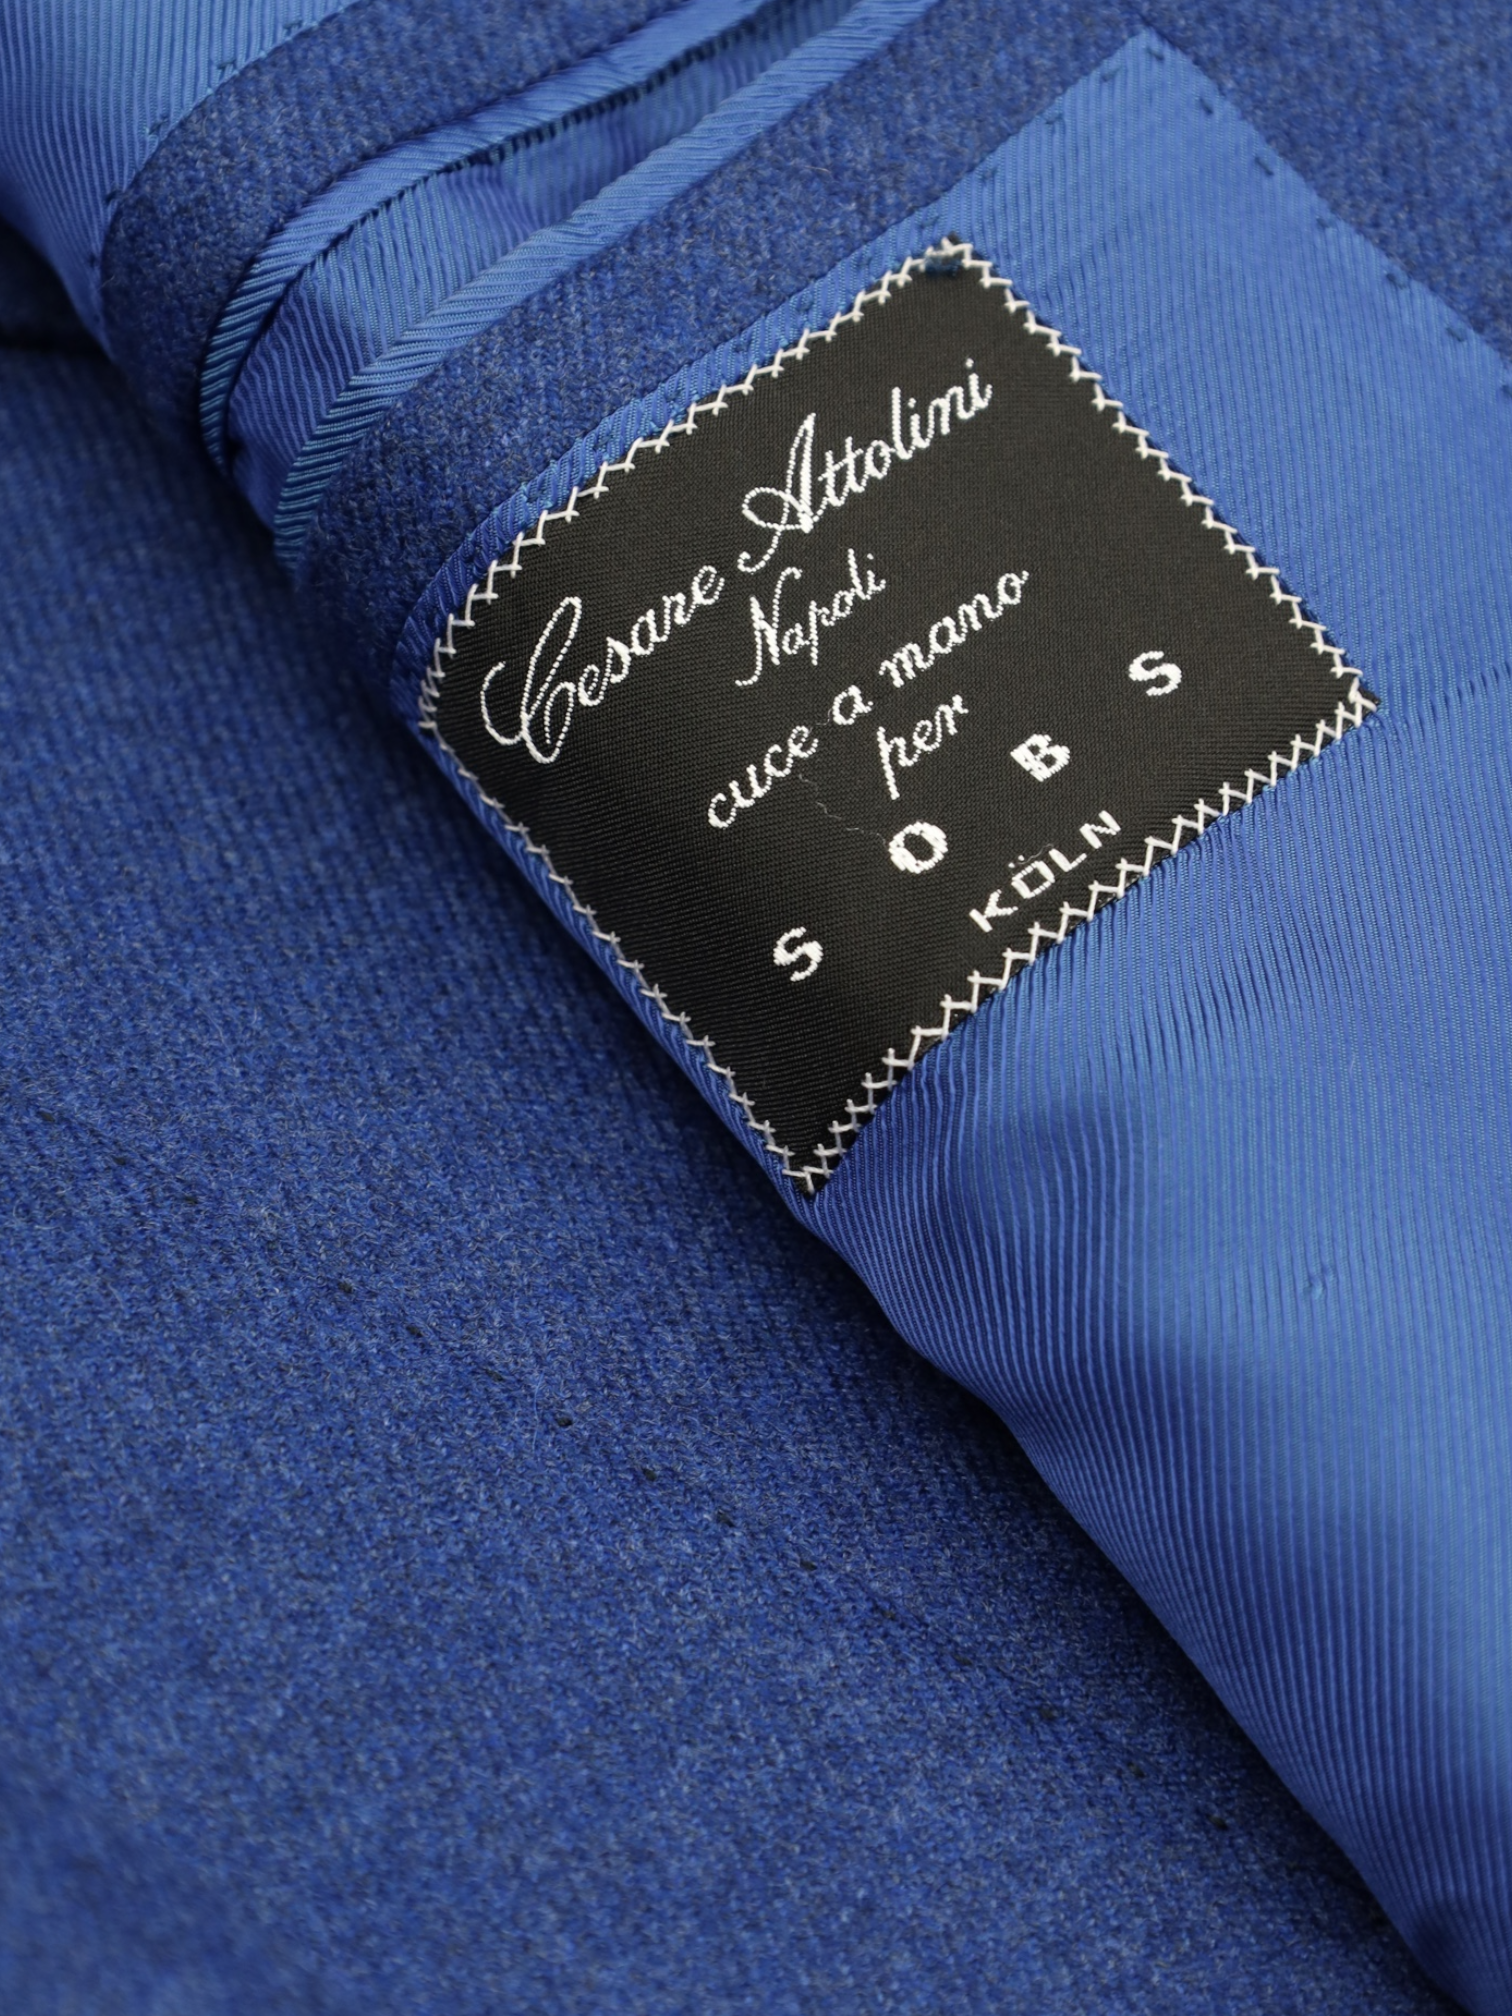 Cesare Attolini Royal Blue Wool & Cashmere Twill Jacket